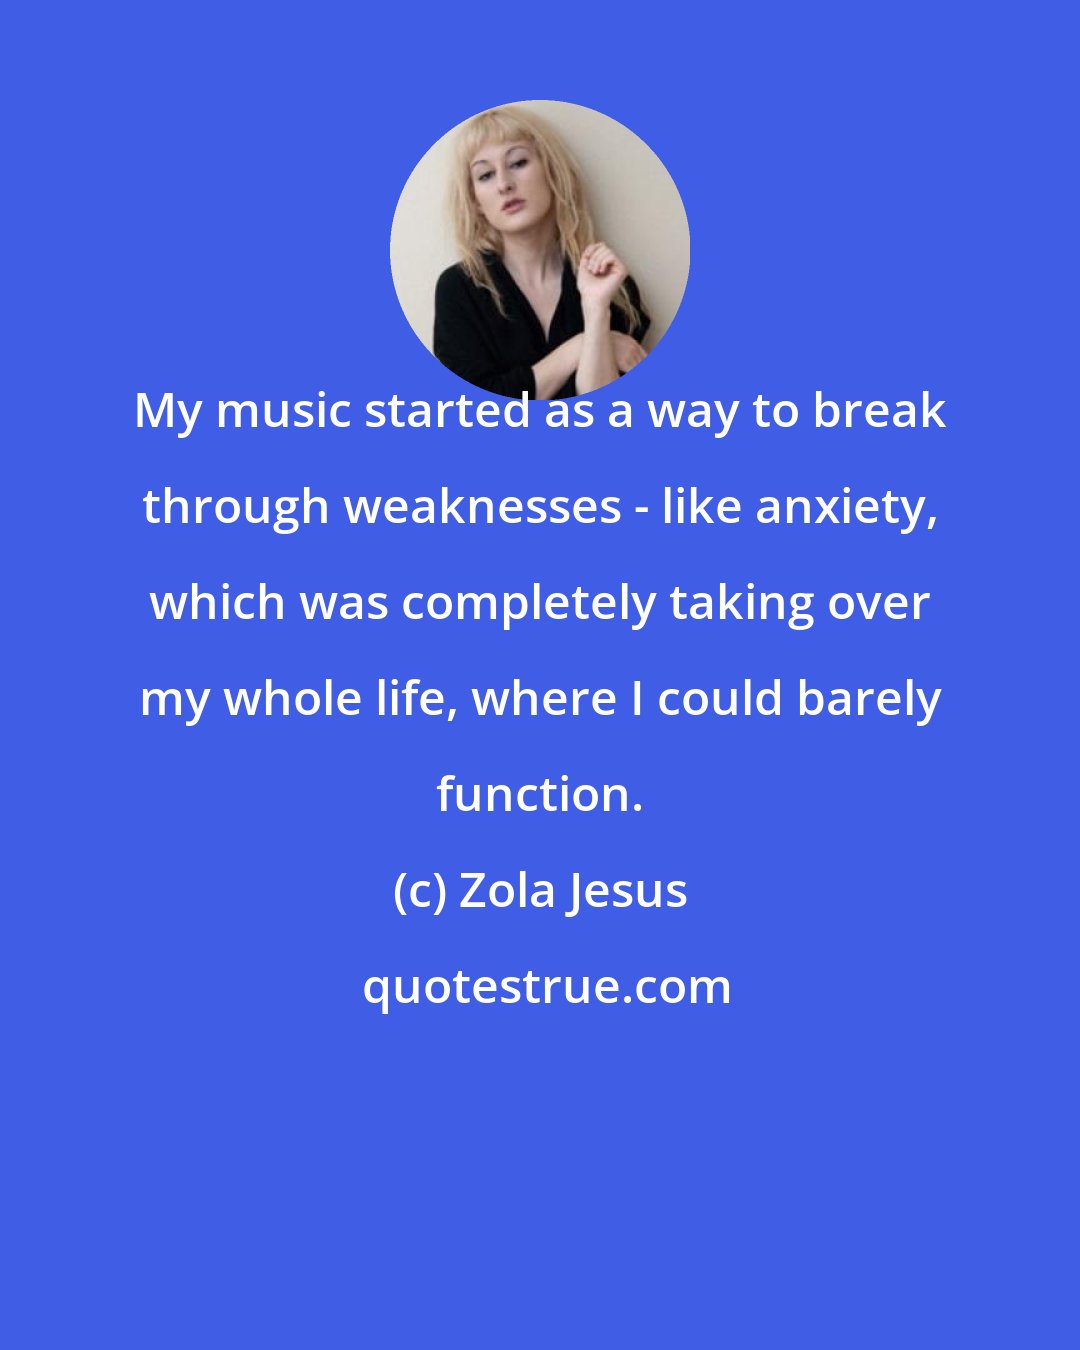 Zola Jesus: My music started as a way to break through weaknesses - like anxiety, which was completely taking over my whole life, where I could barely function.